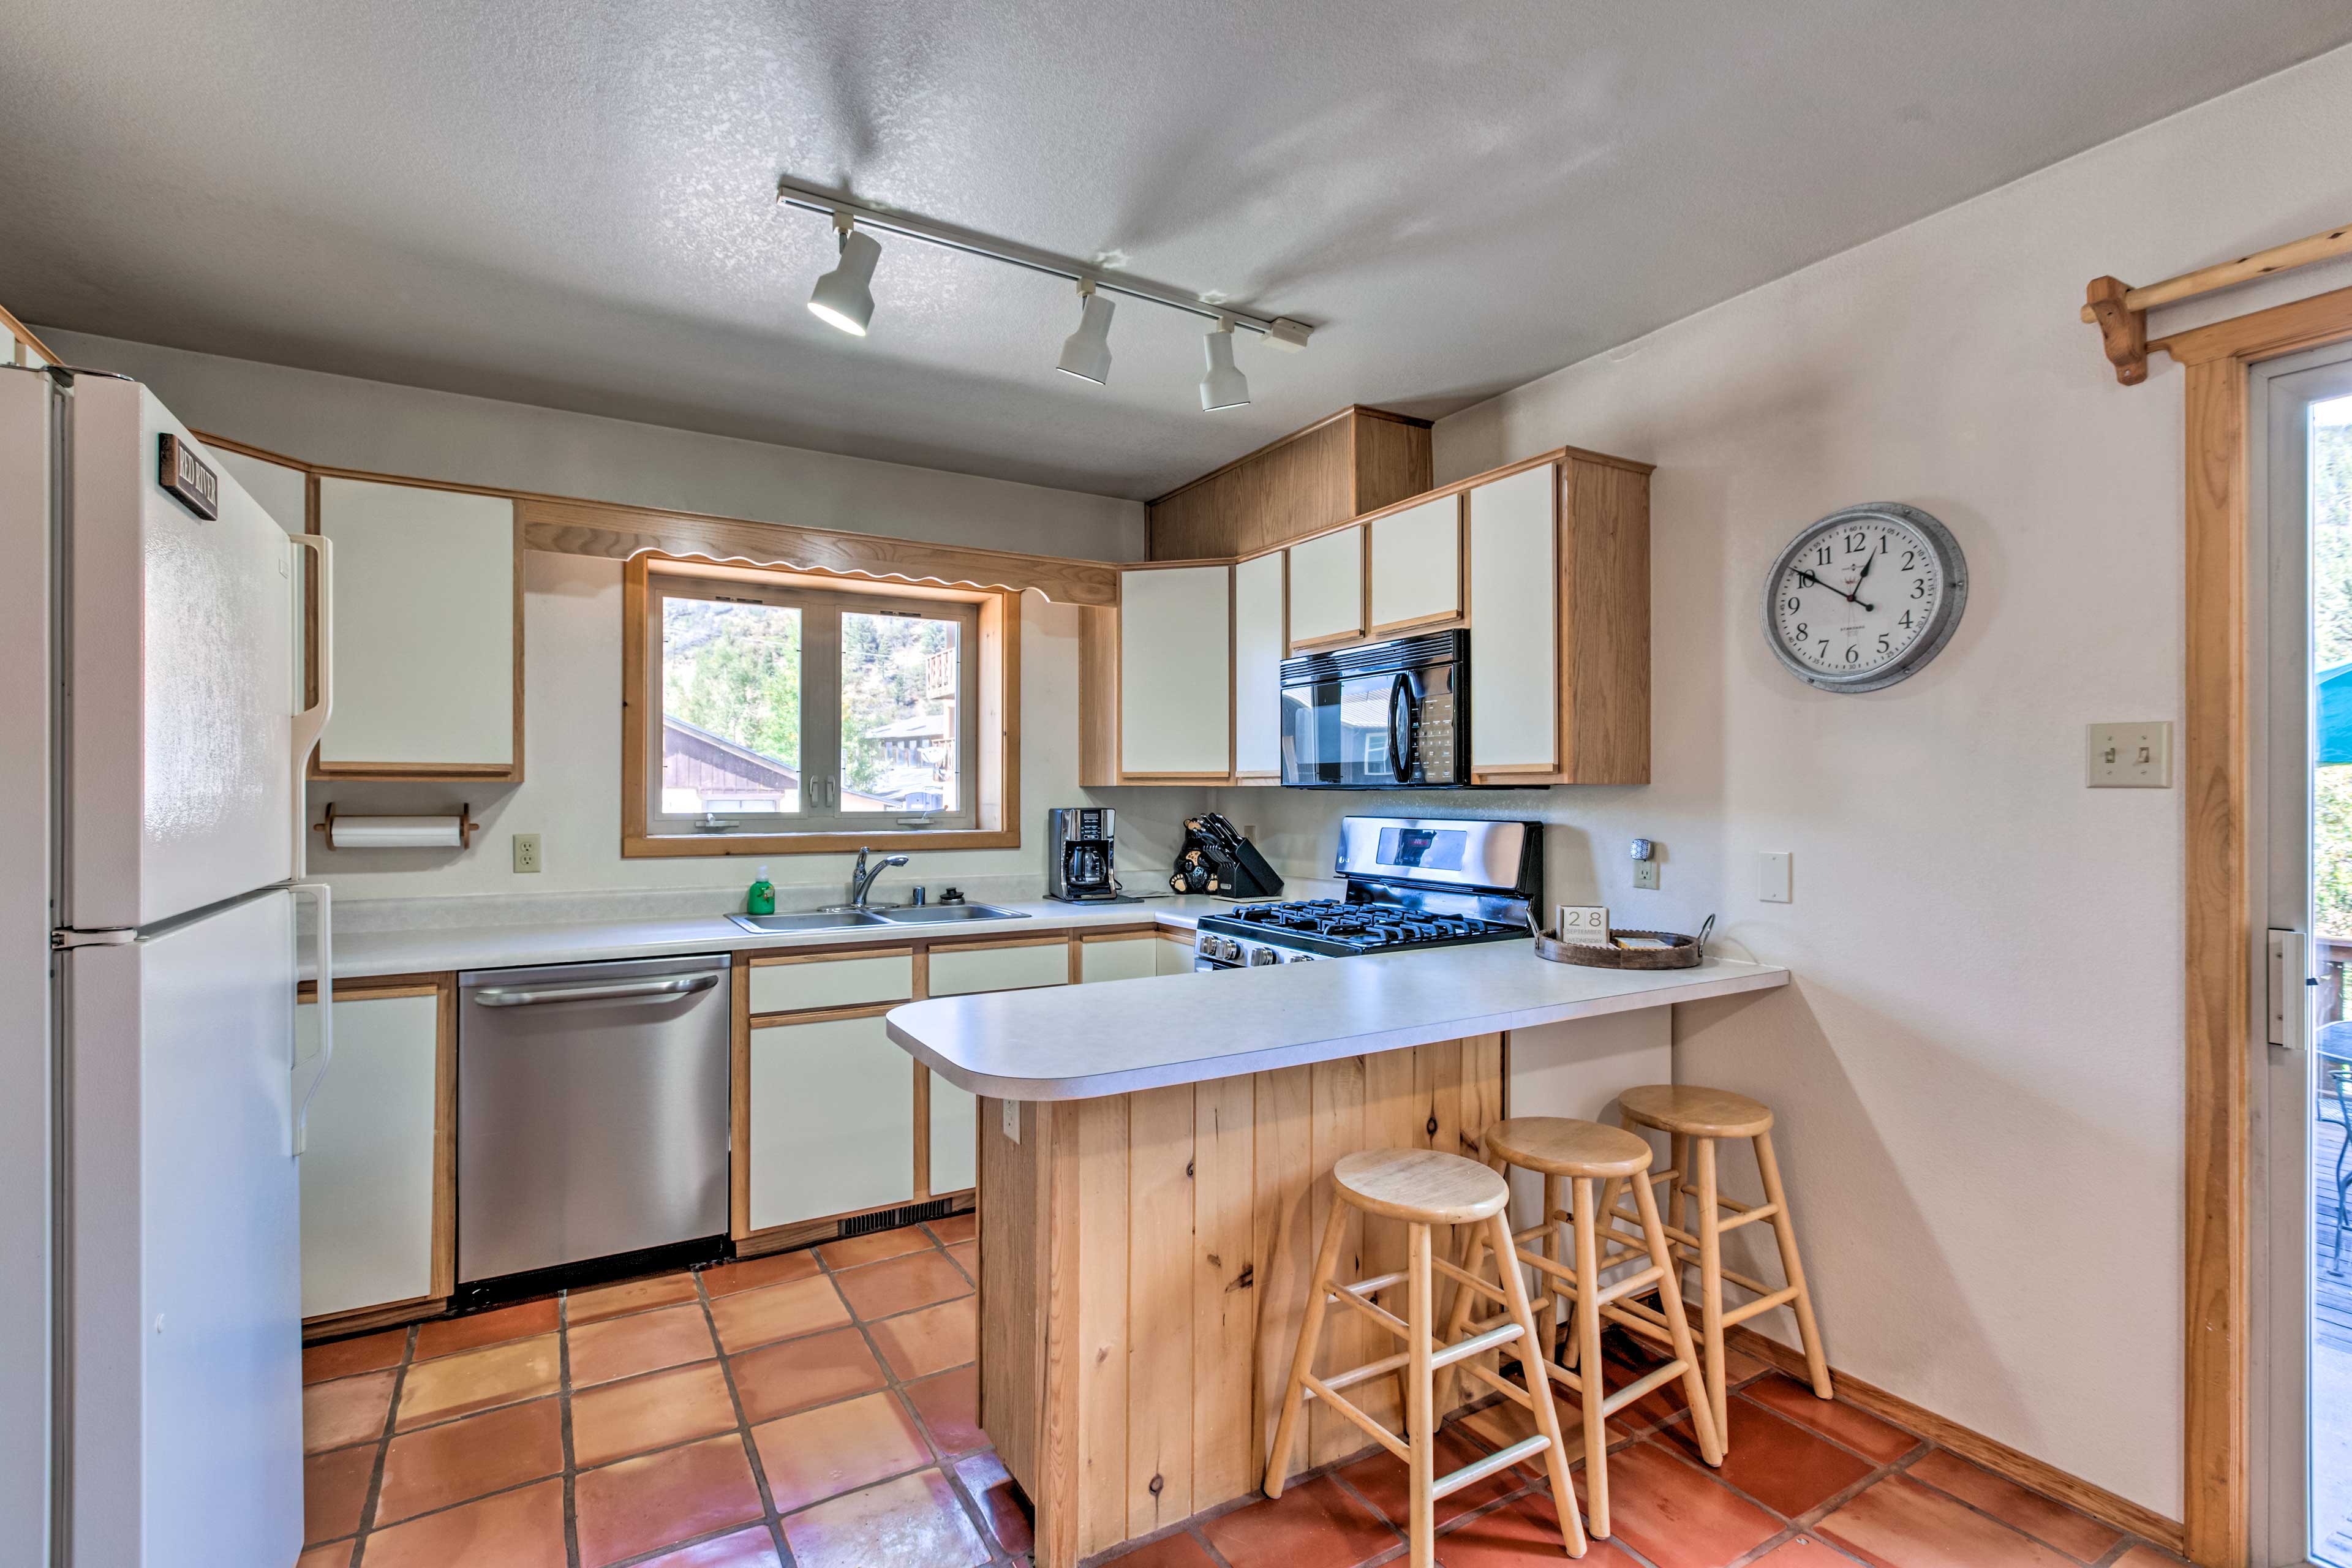 Kitchen | Equipped w/ Cooking Basics | Breakfast Bar w/ Additional Seating